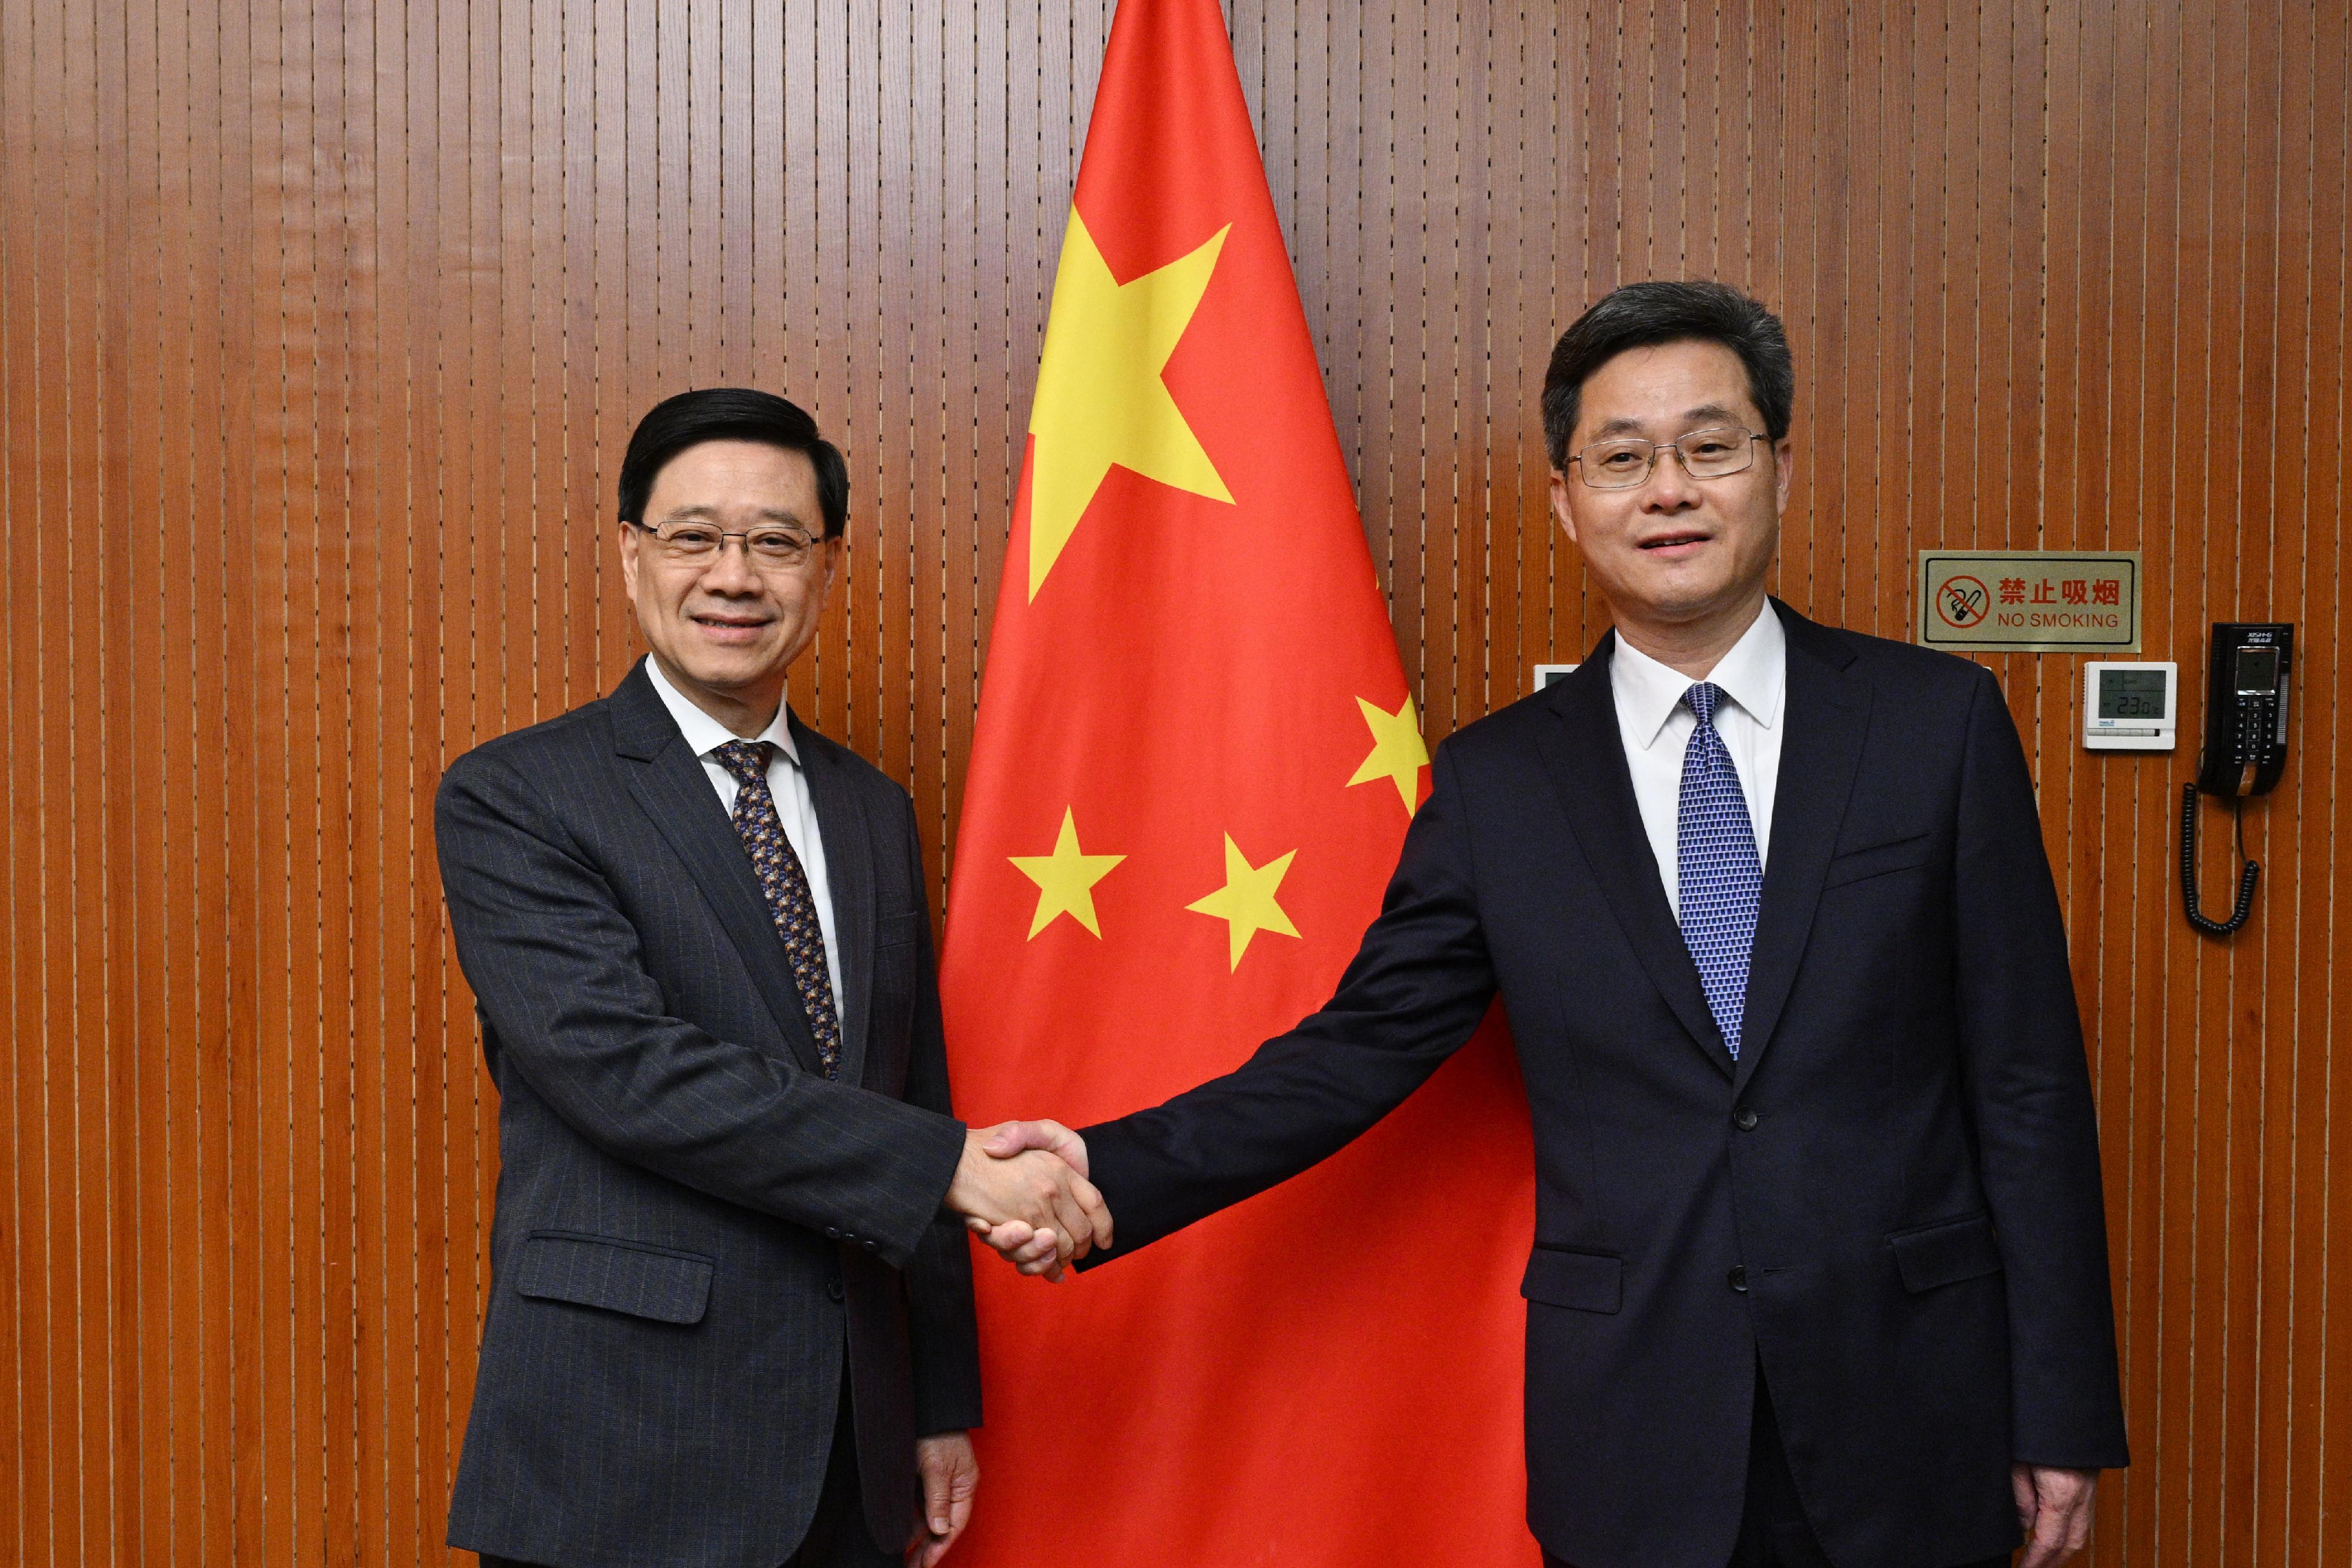 The Chief Executive, Mr John Lee (left), meets with the Minister of Finance, Mr Lan Fo'an (right), in Beijing this afternoon (March 4).